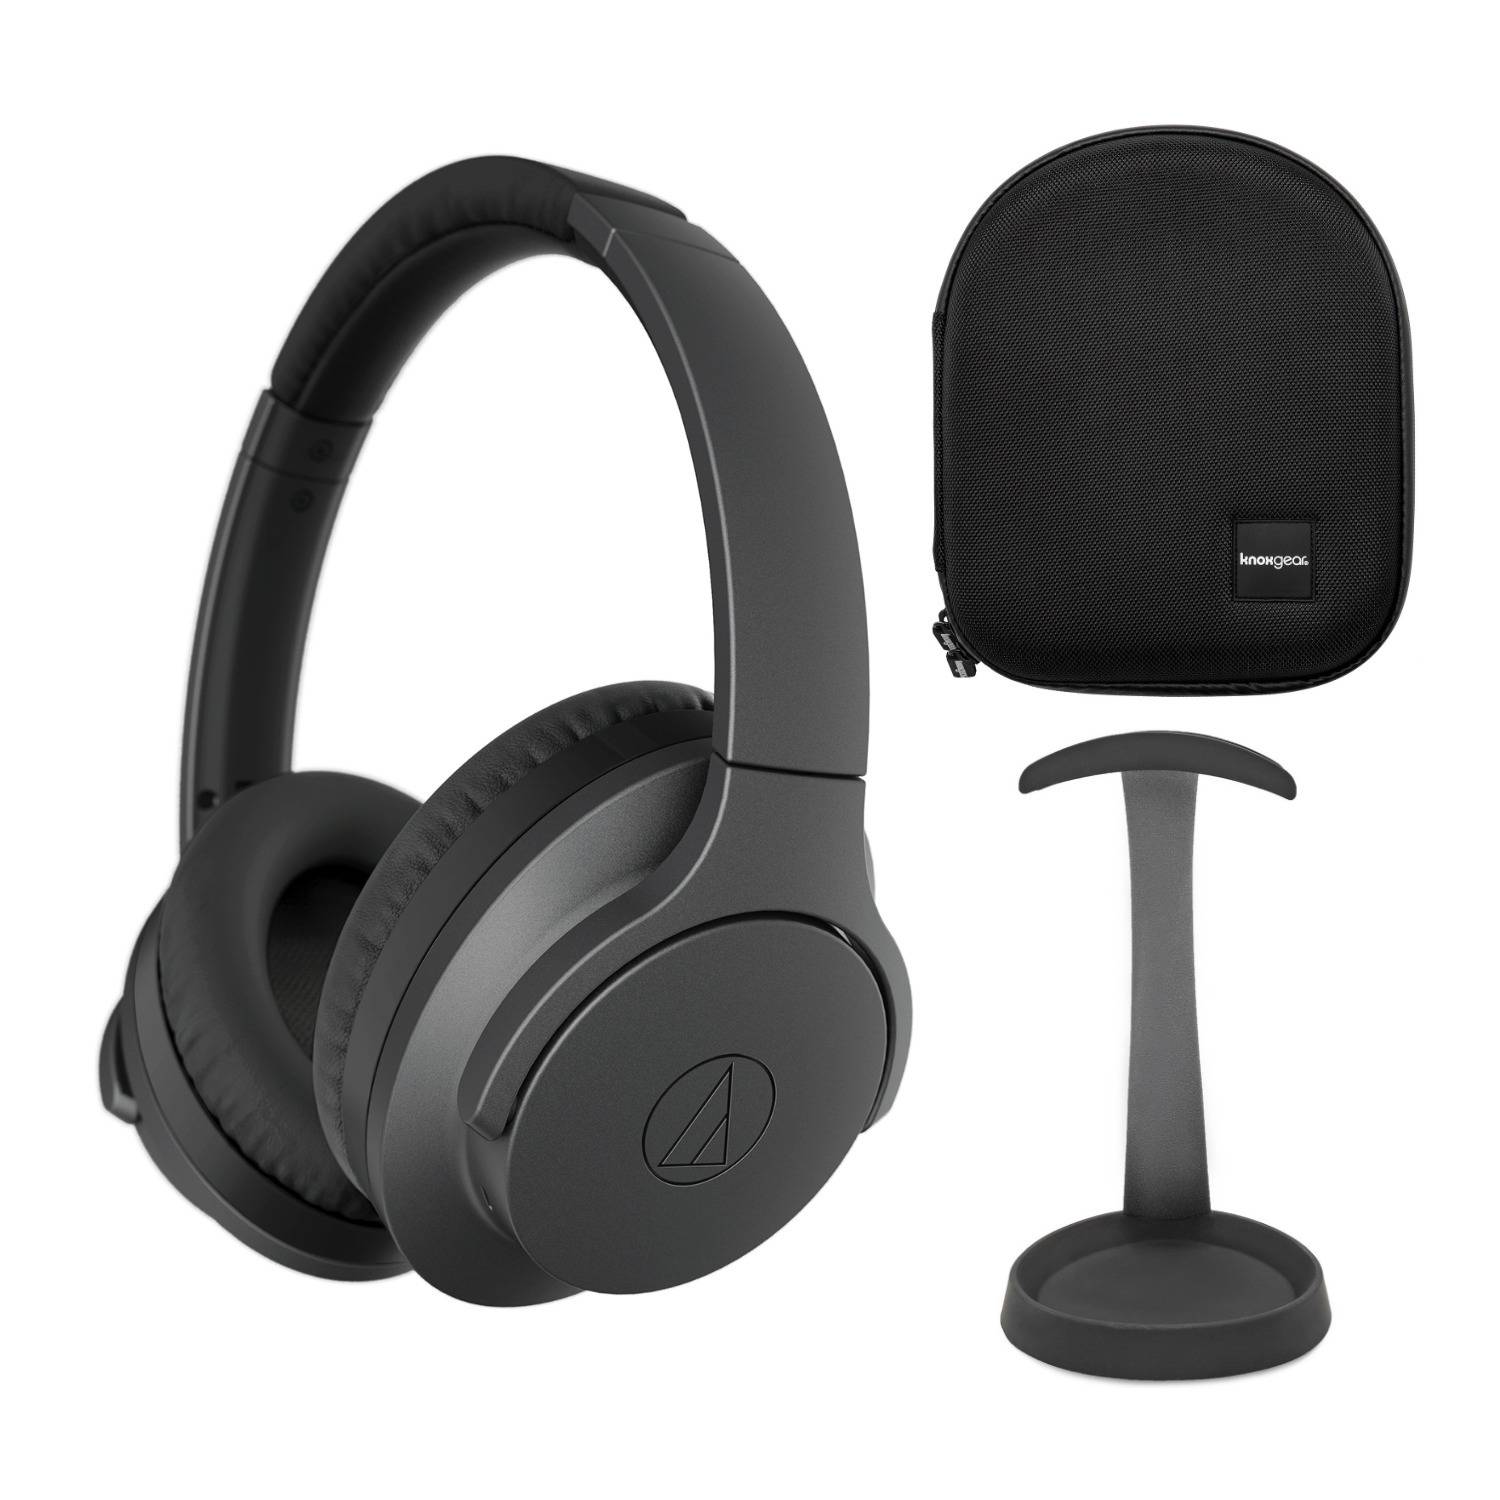 Audio-Technica ATH-ANC700BTBK Wireless Noise-Canceling Headphones (Black) with Gear Stand, Case